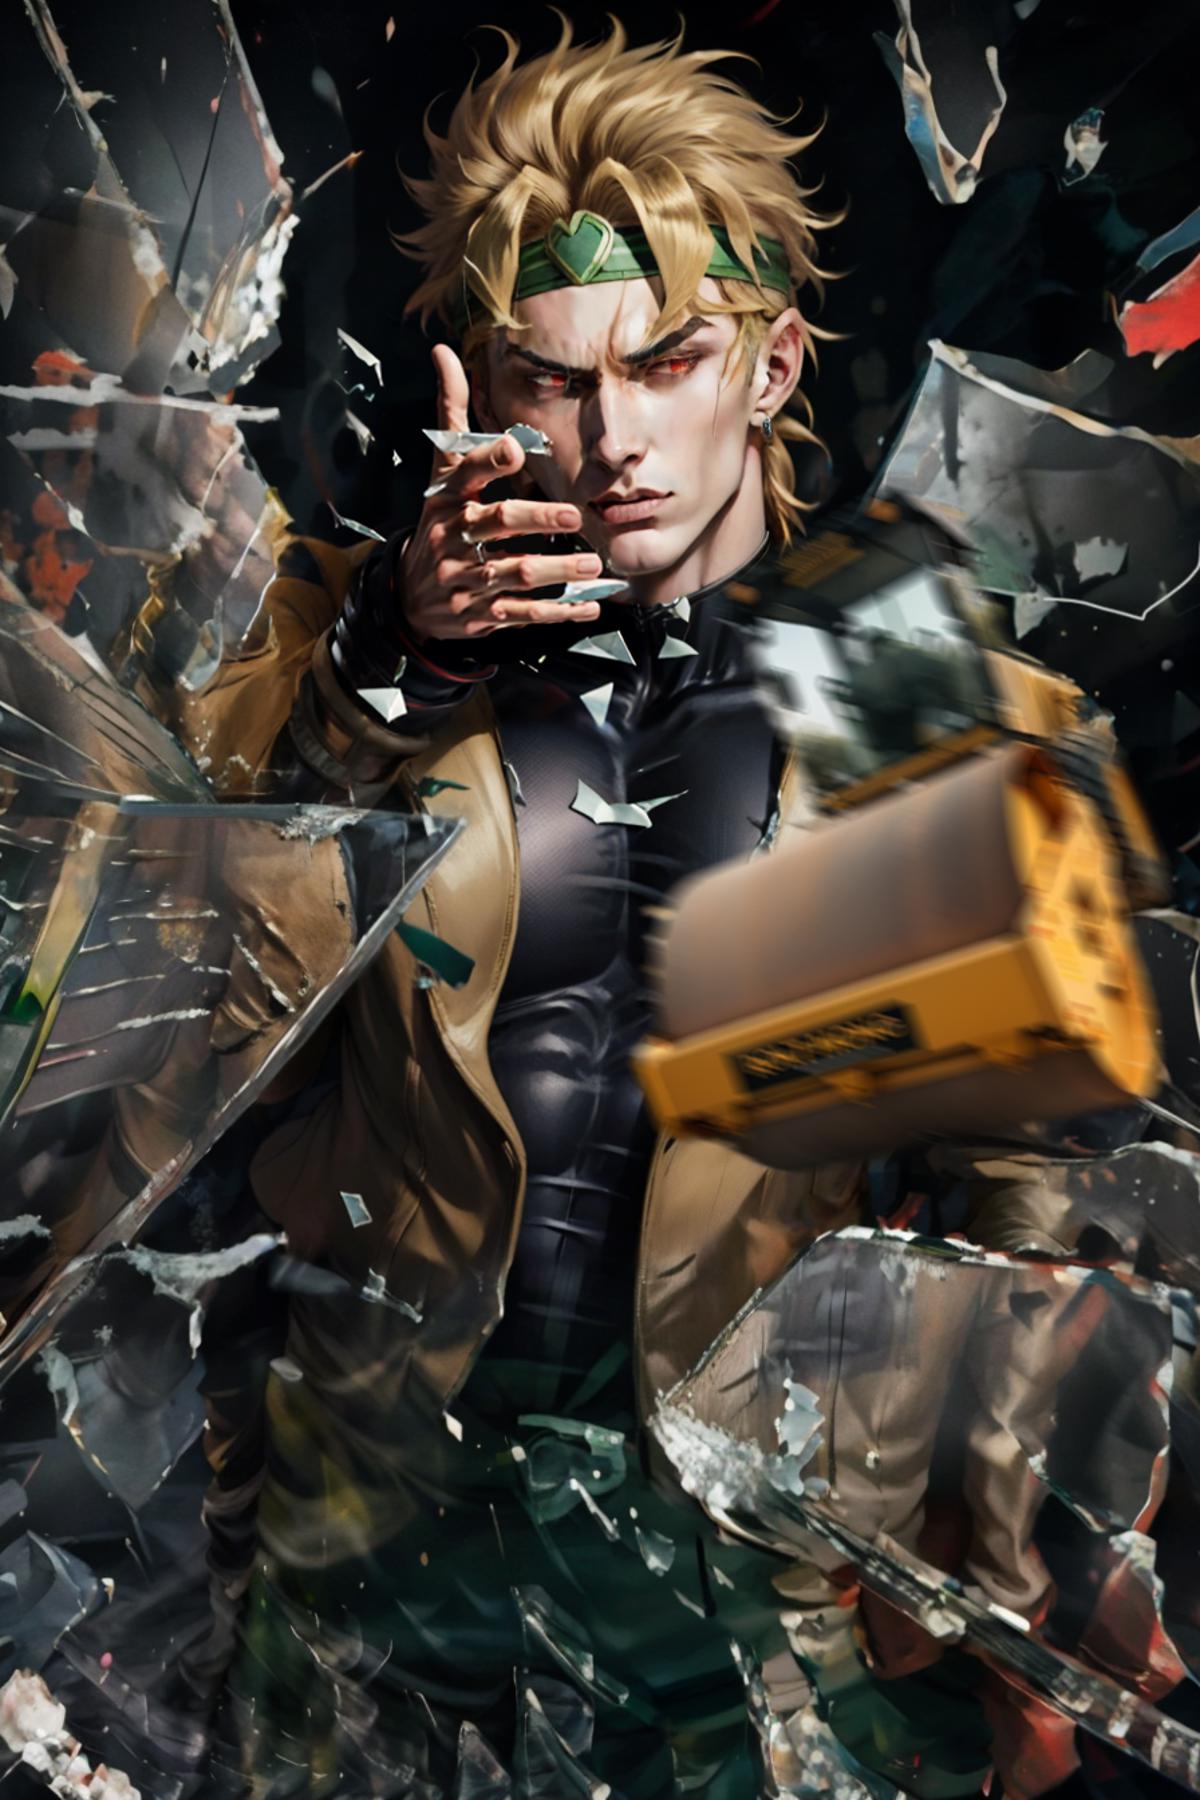 The image features a man dressed in a black shirt and jacket, holding a yellow briefcase in his hand, standing in front of shattered glass. He appears to be making a tough face and pointing his finger, possibly indicating a serious or intense situation. The man's outfit and the presence of the briefcase suggest that he might be a character from a comic book or a movie. The shattered glass behind him adds an element of danger or action to the scene.